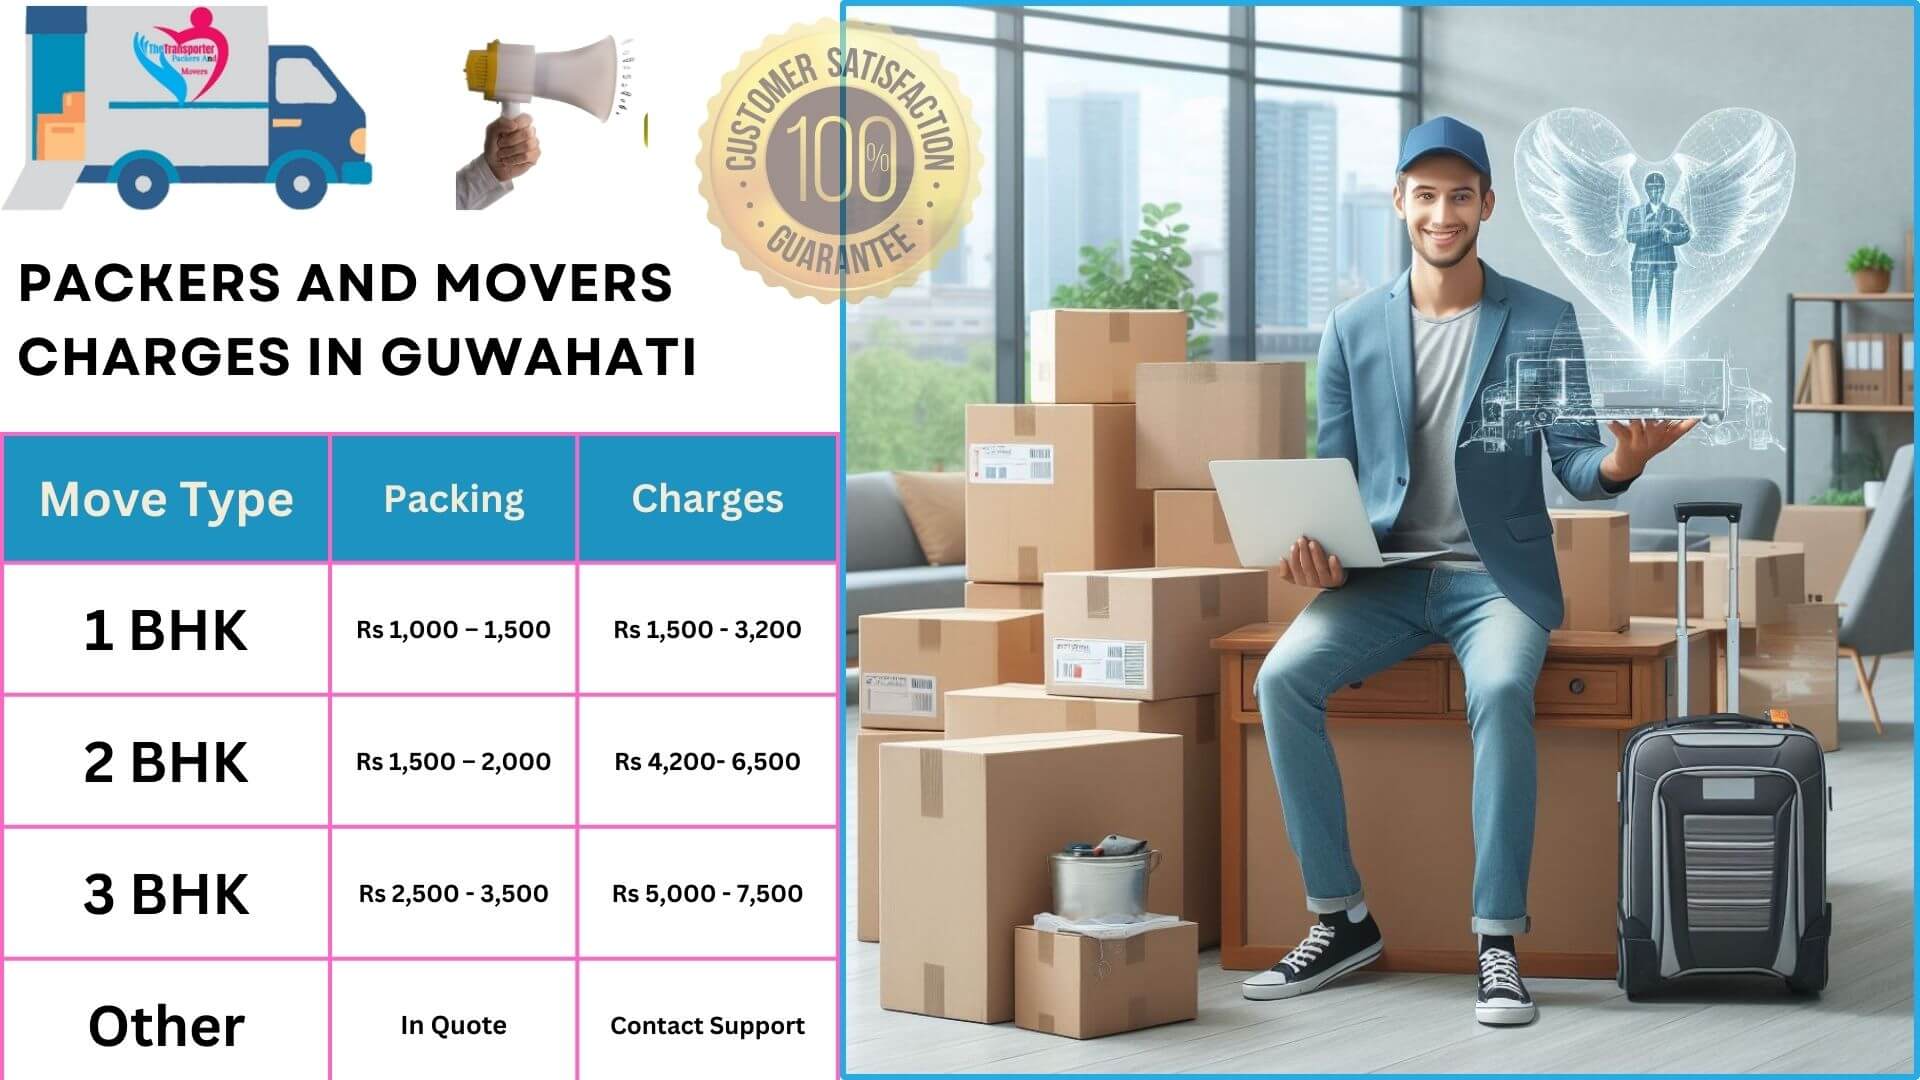 TheTransporter Packers and movers Charges list in Guwahati 